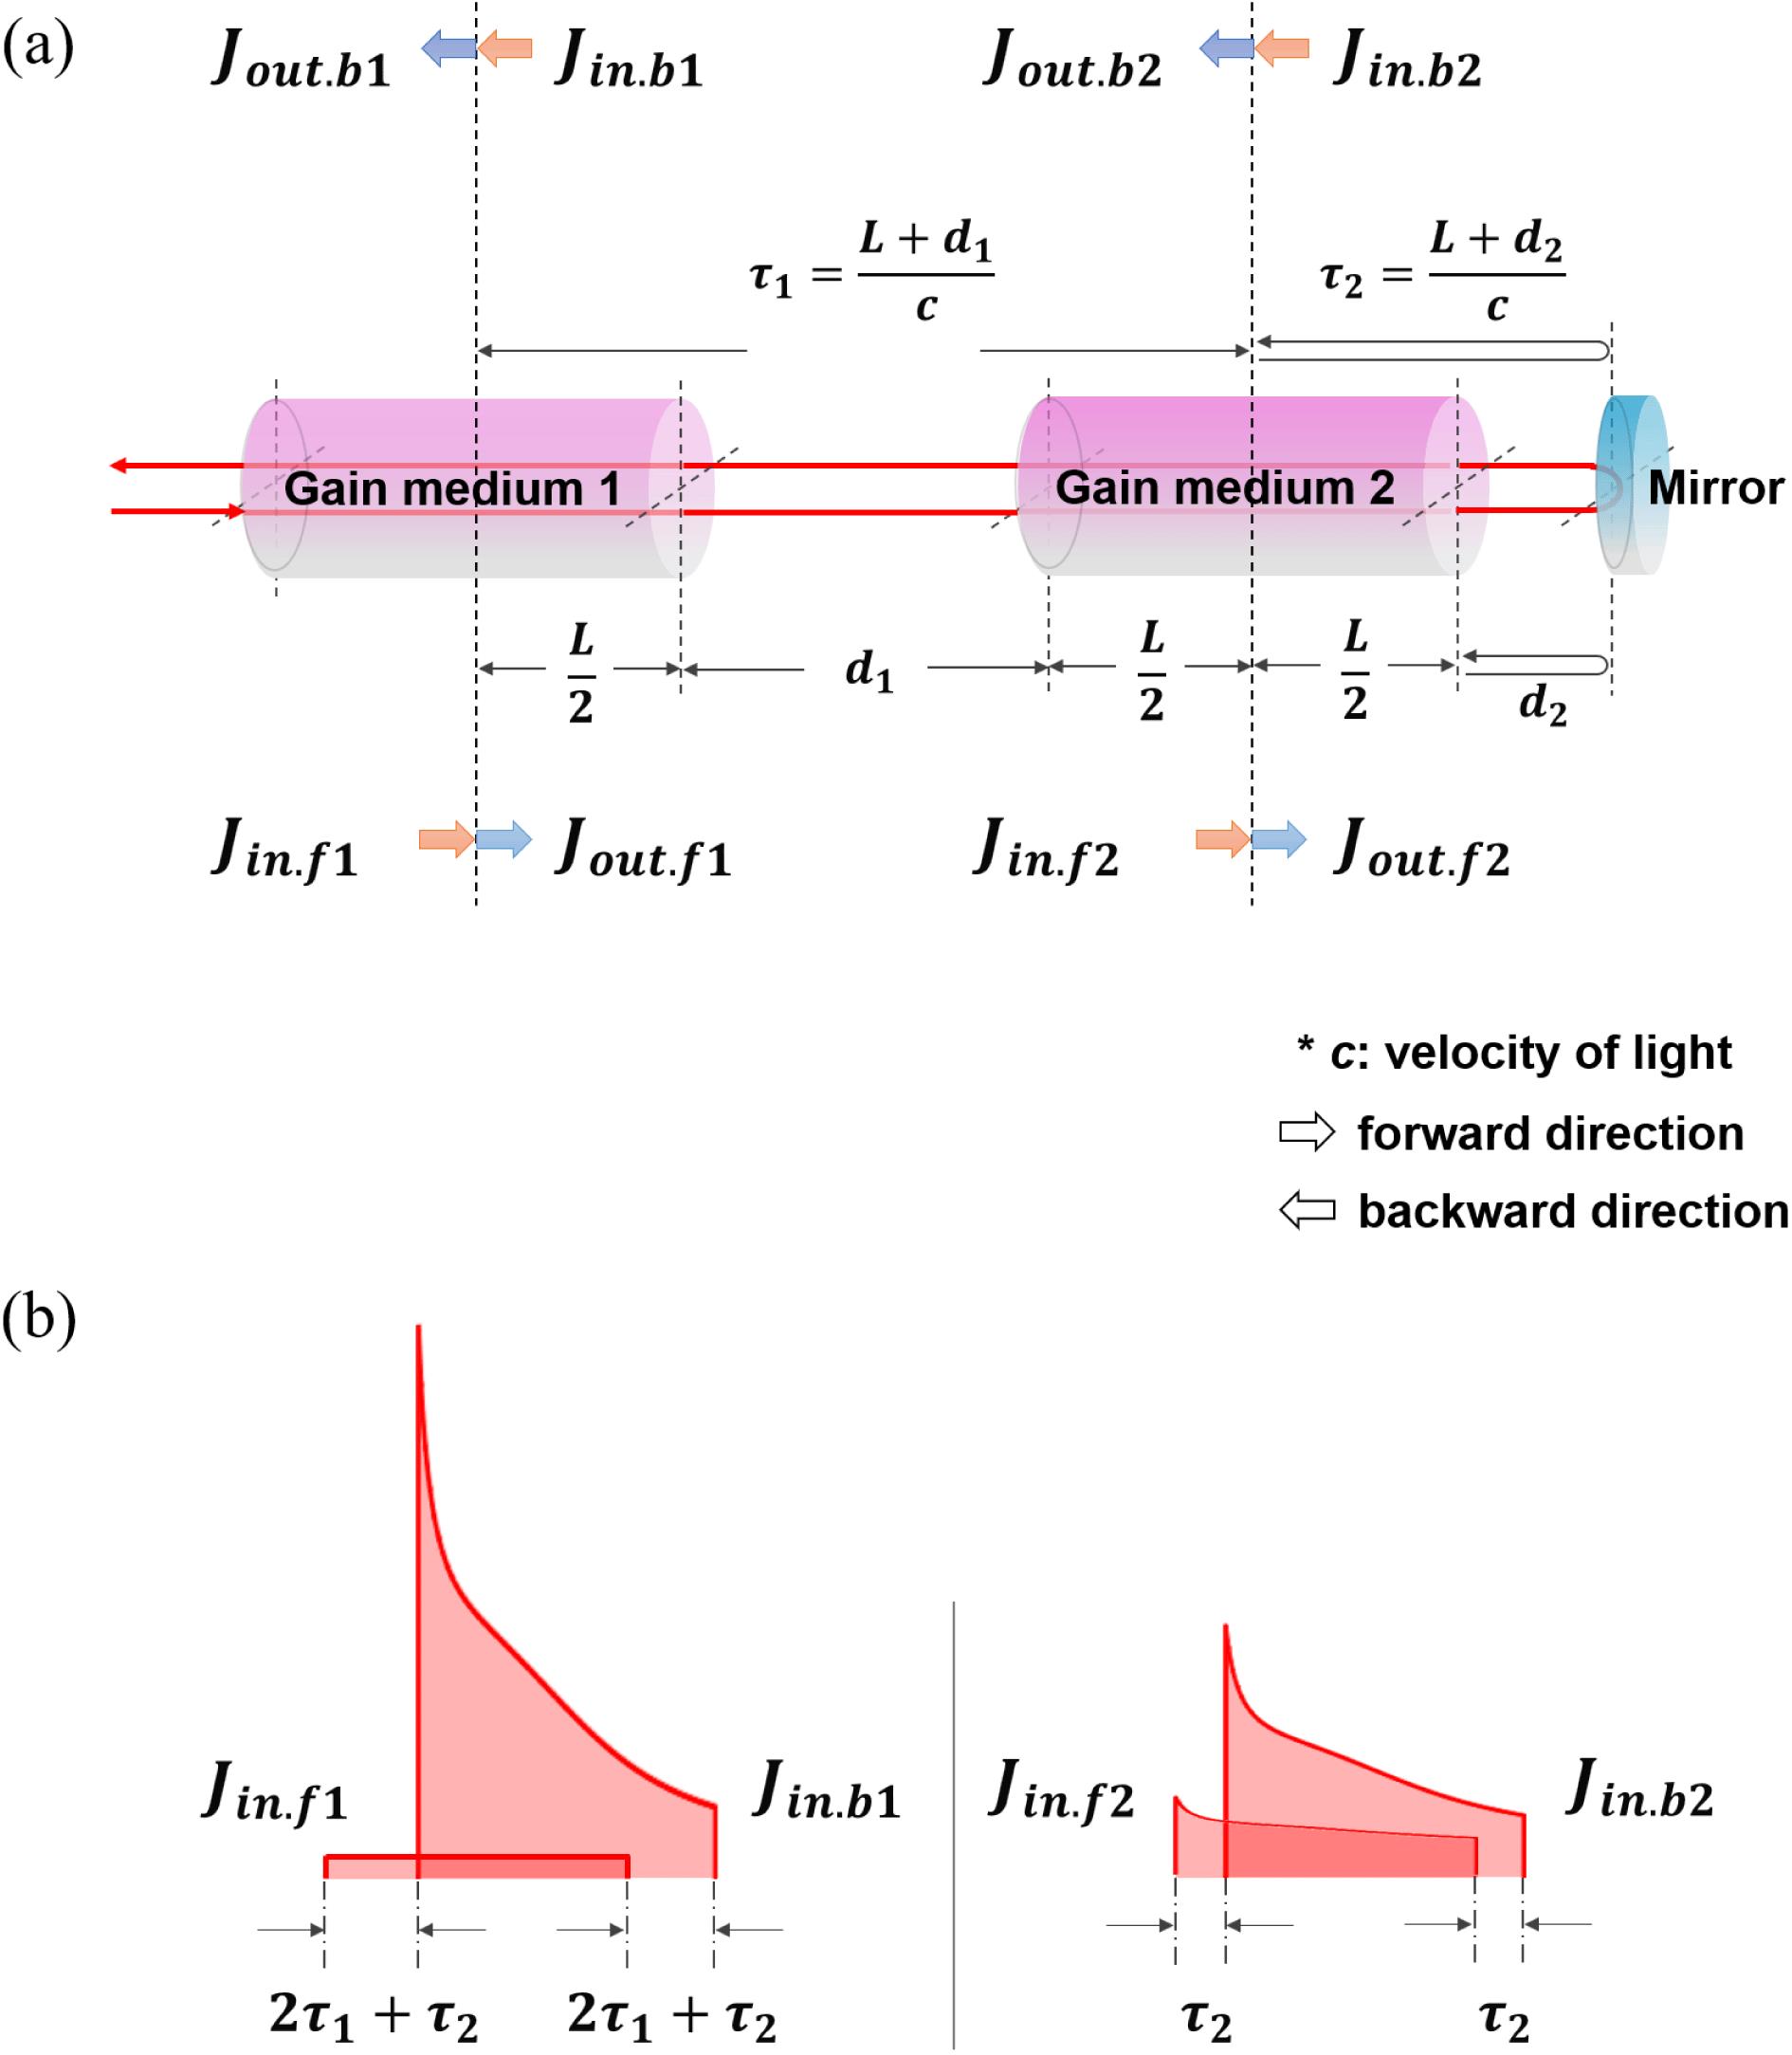 (a) Scheme of a double-pass laser amplifier:,,andare the equivalent fluences of the input and output energy in the forward propagating direction in gain media 1 and 2, respectively. Similarly,,,andare the equivalent fluences of the input and output energy in the backward propagating direction in gain media 1 and 2, respectively. The temporal lengthsandcalculated from the geometry of the amplifier determine the time delay between each input. (b) The front part of the amplified input pulse is reflected on the mirror and is overlapped with the rear part of the input pulse in gain media 1 and 2, according toand.